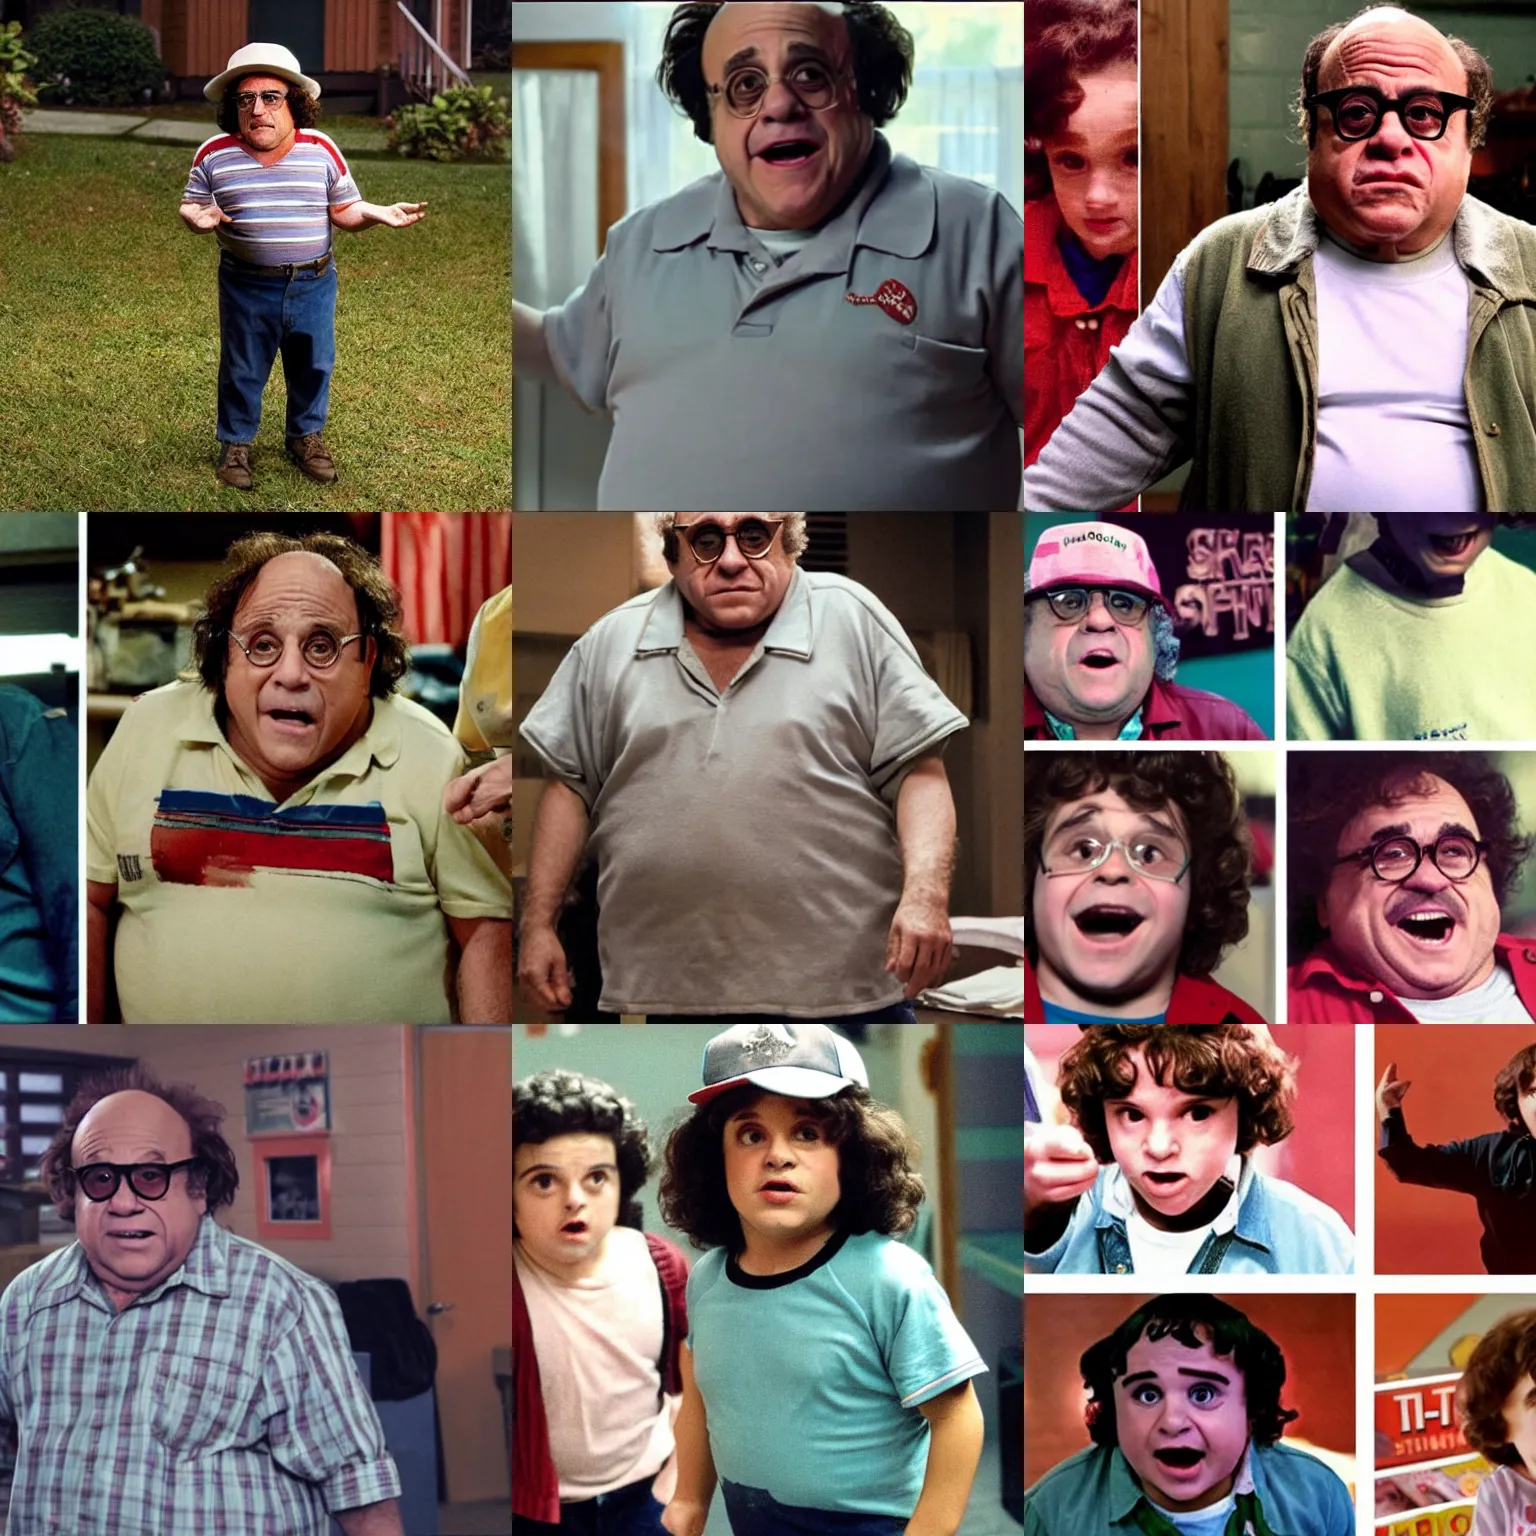 Prompt: Danny devito as Dustin from Stranger things